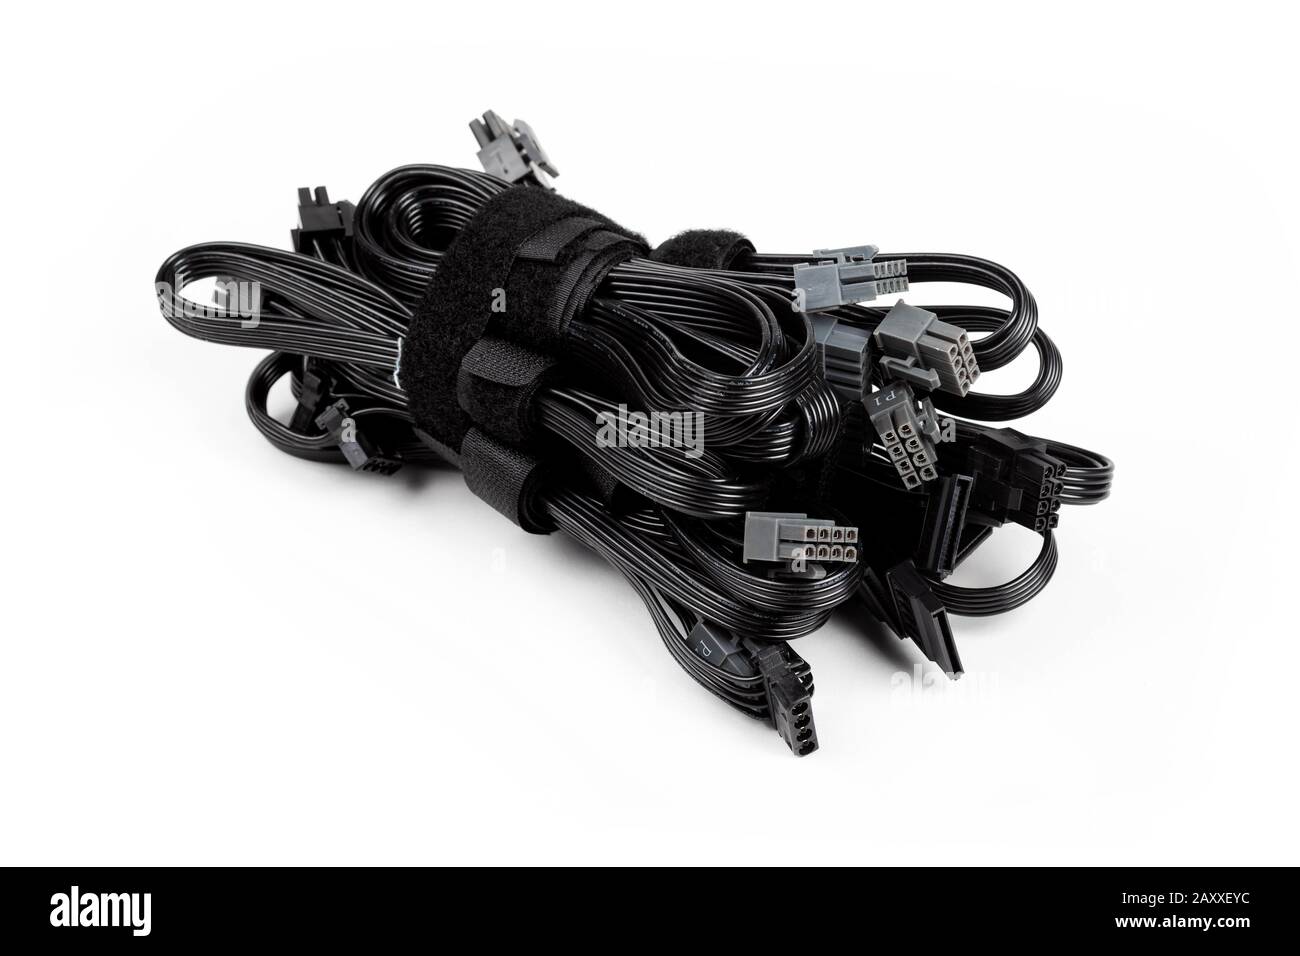 Black modular power supply unit cables set, psu cords put together isolated on white. Many power cables, modern pc assembly parts. Cable management Stock Photo